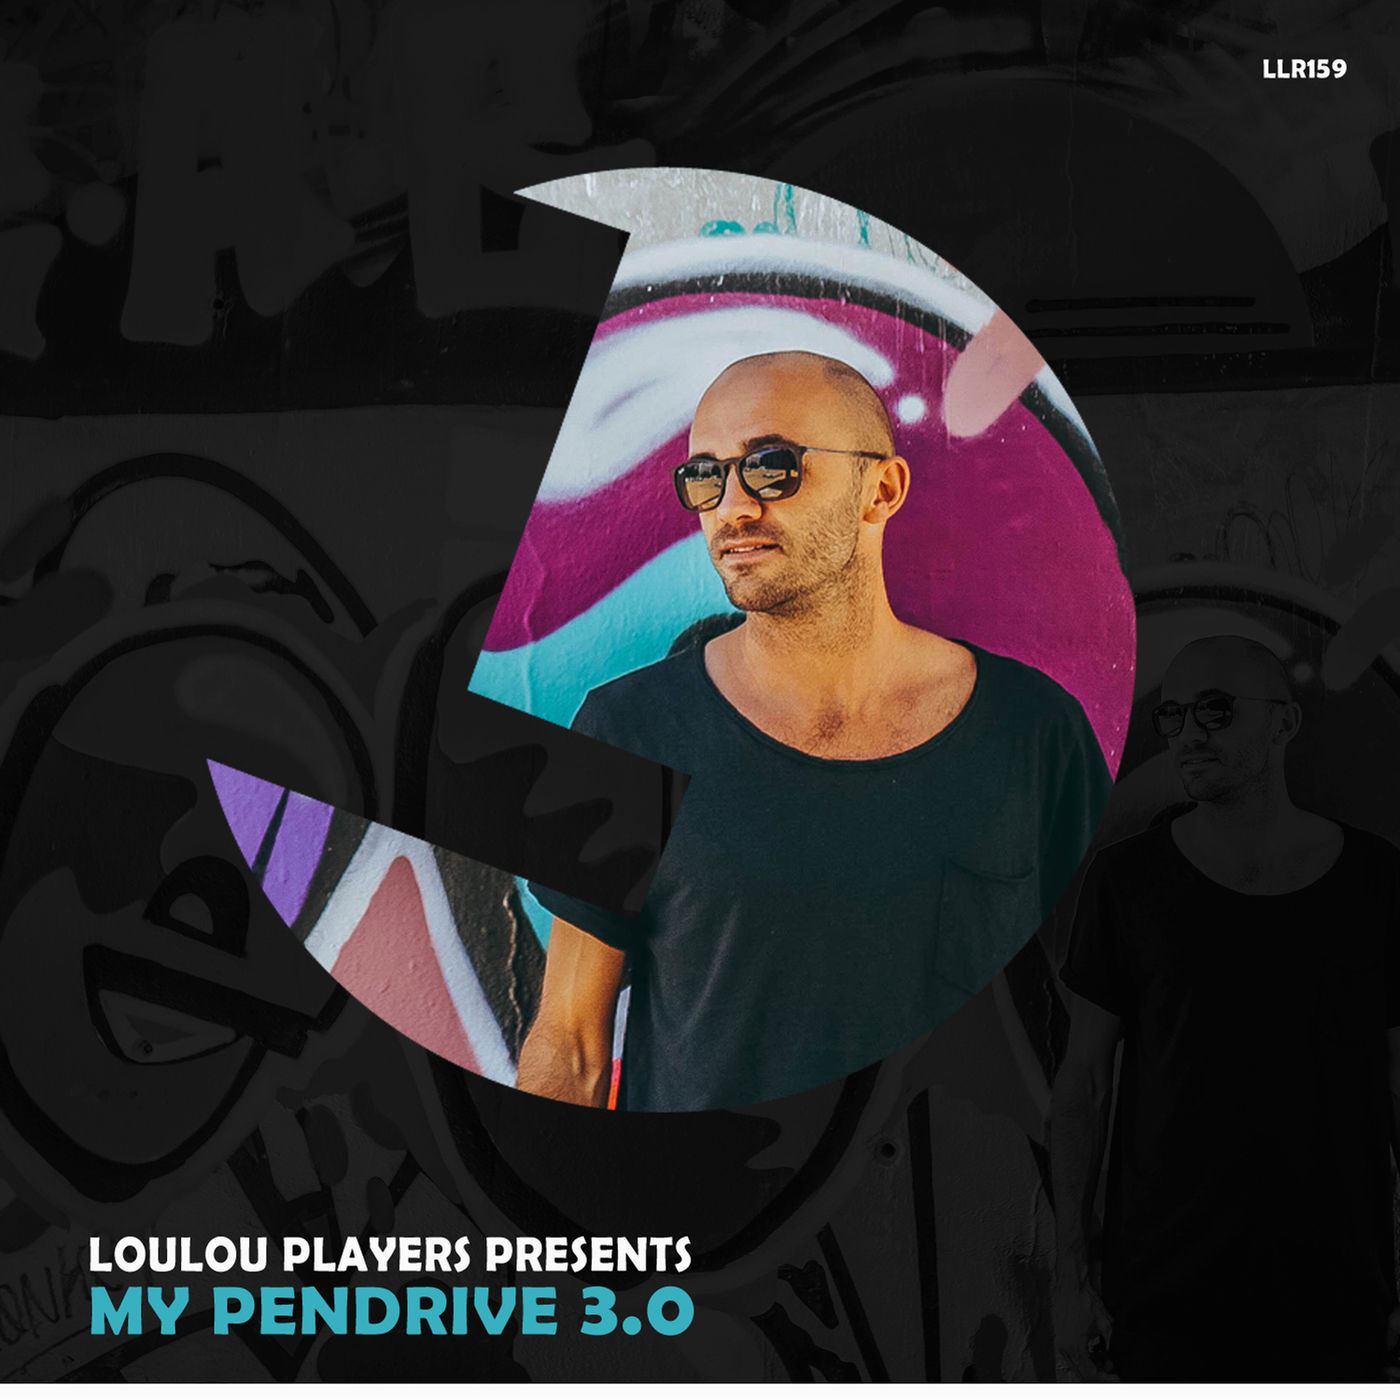 VA - Loulou Players Presents My Pendrive 3.0 / Loulou records